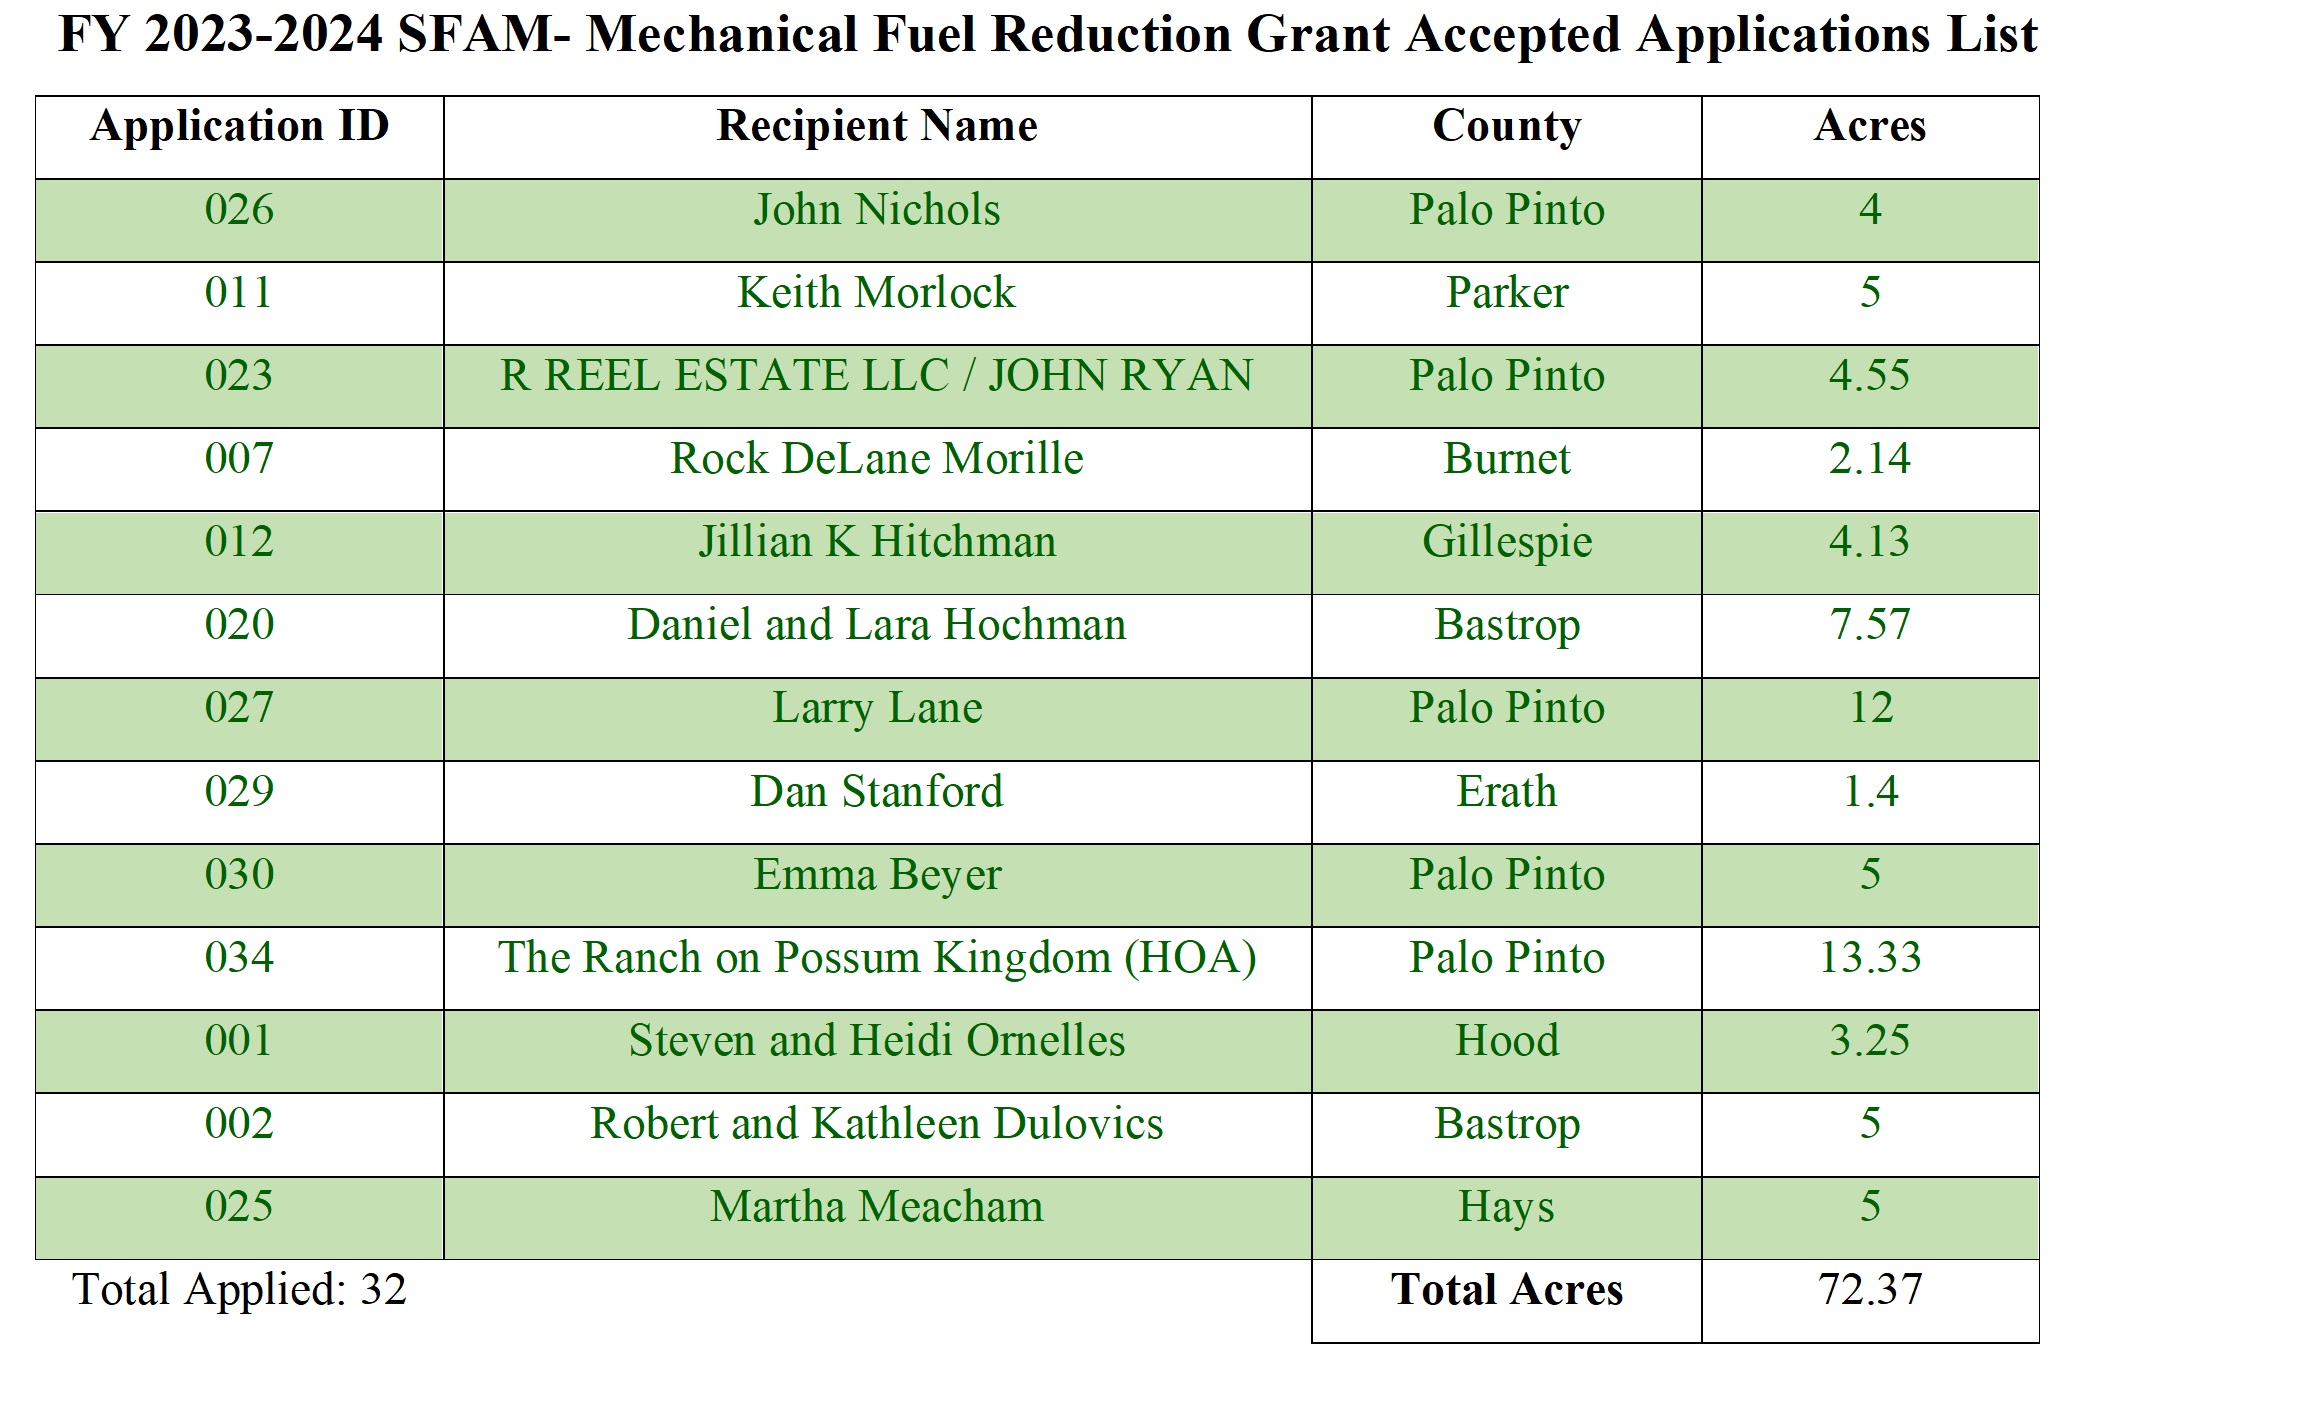 FY 2023-2024 SFAM Mechanical Fuel Reduction Grant Accepted Applications List